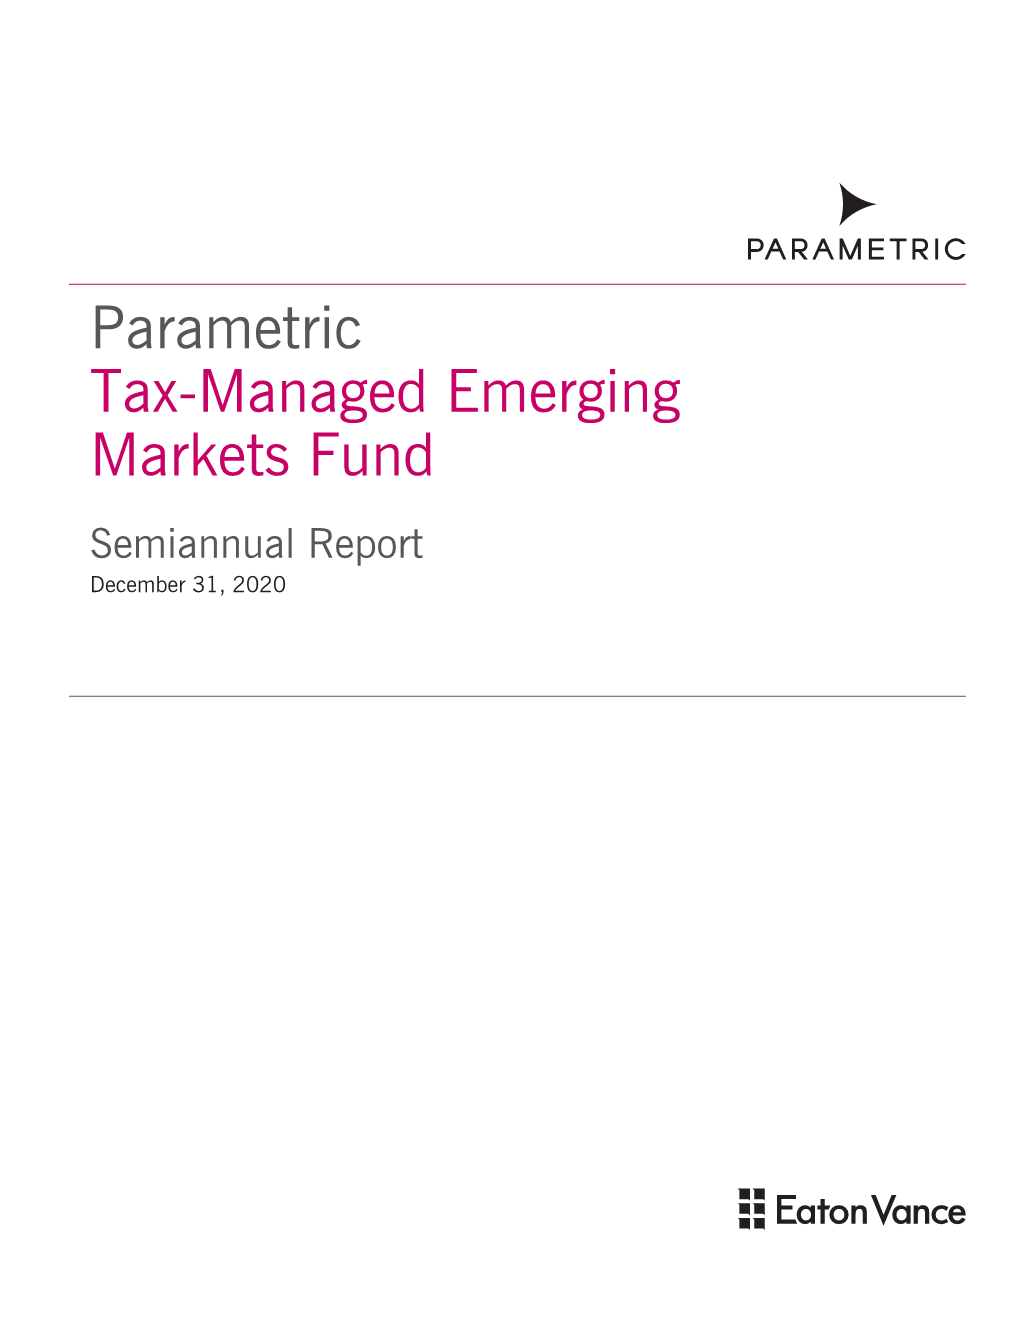 Parametric Tax-Managed Emerging Markets Fund Semiannual Report December 31, 2020 Commodity Futures Trading Commission Registration